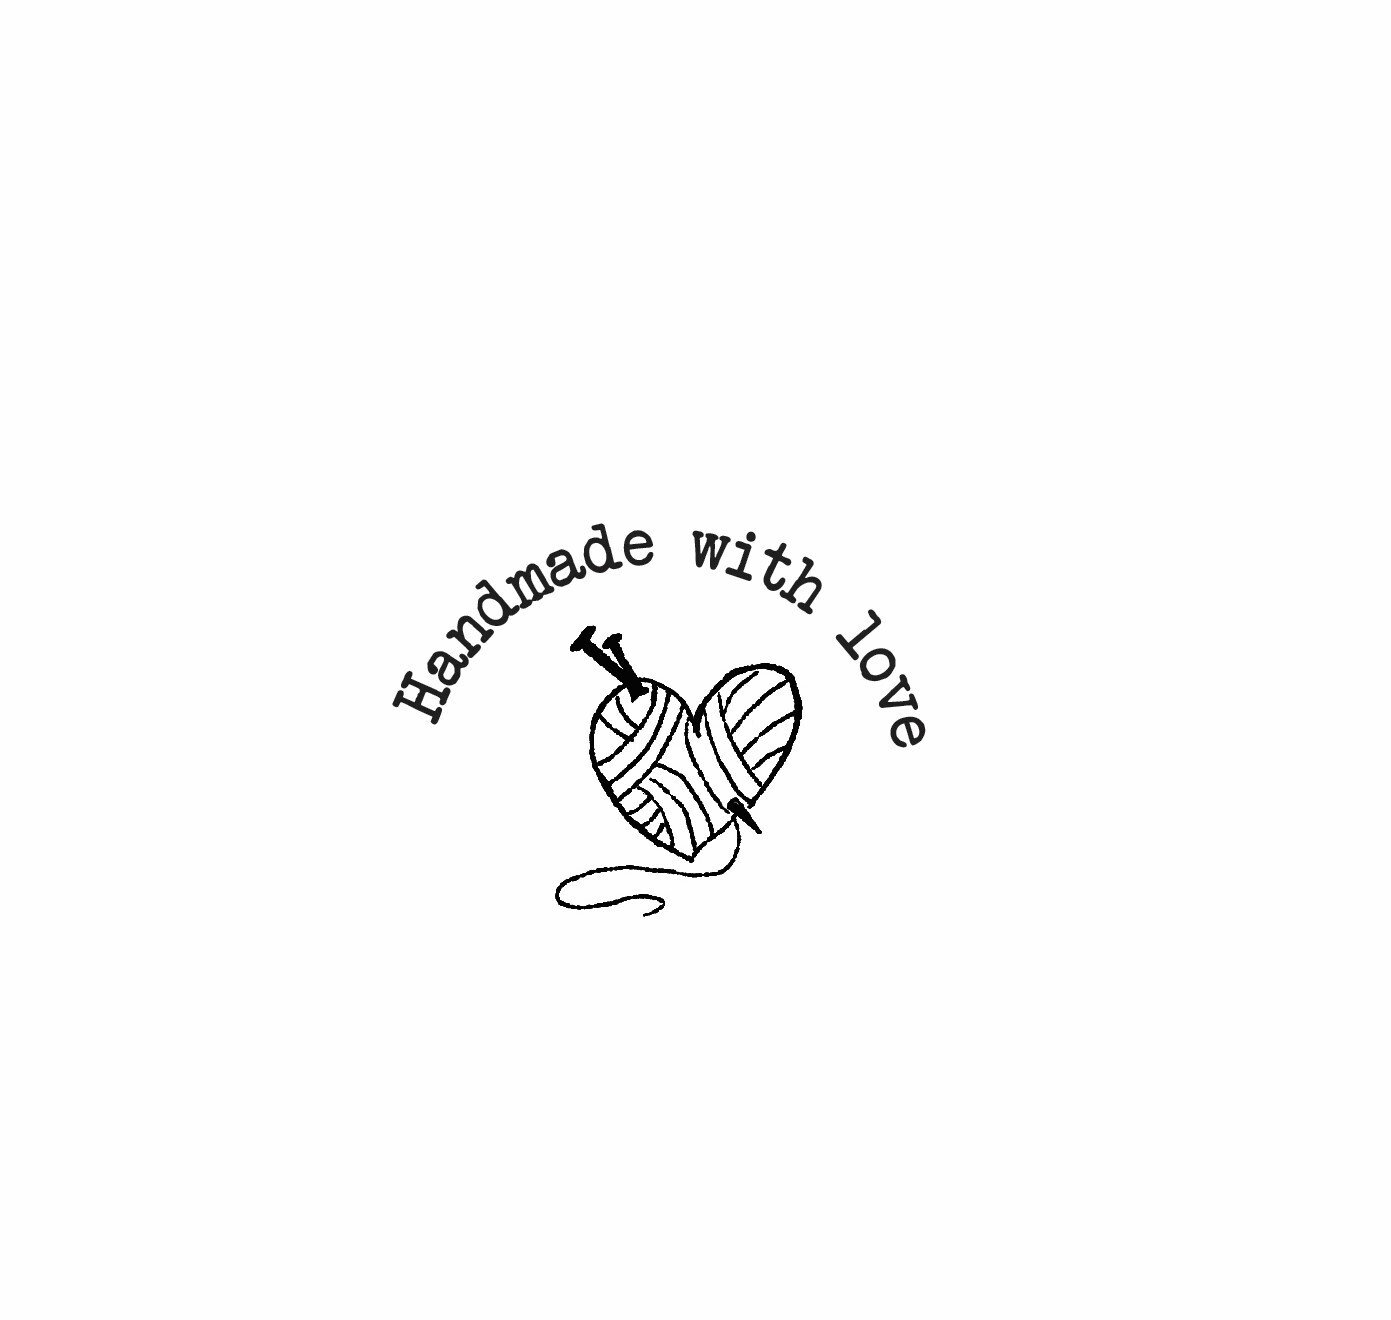 "Handmade with love" Rubber Stamp